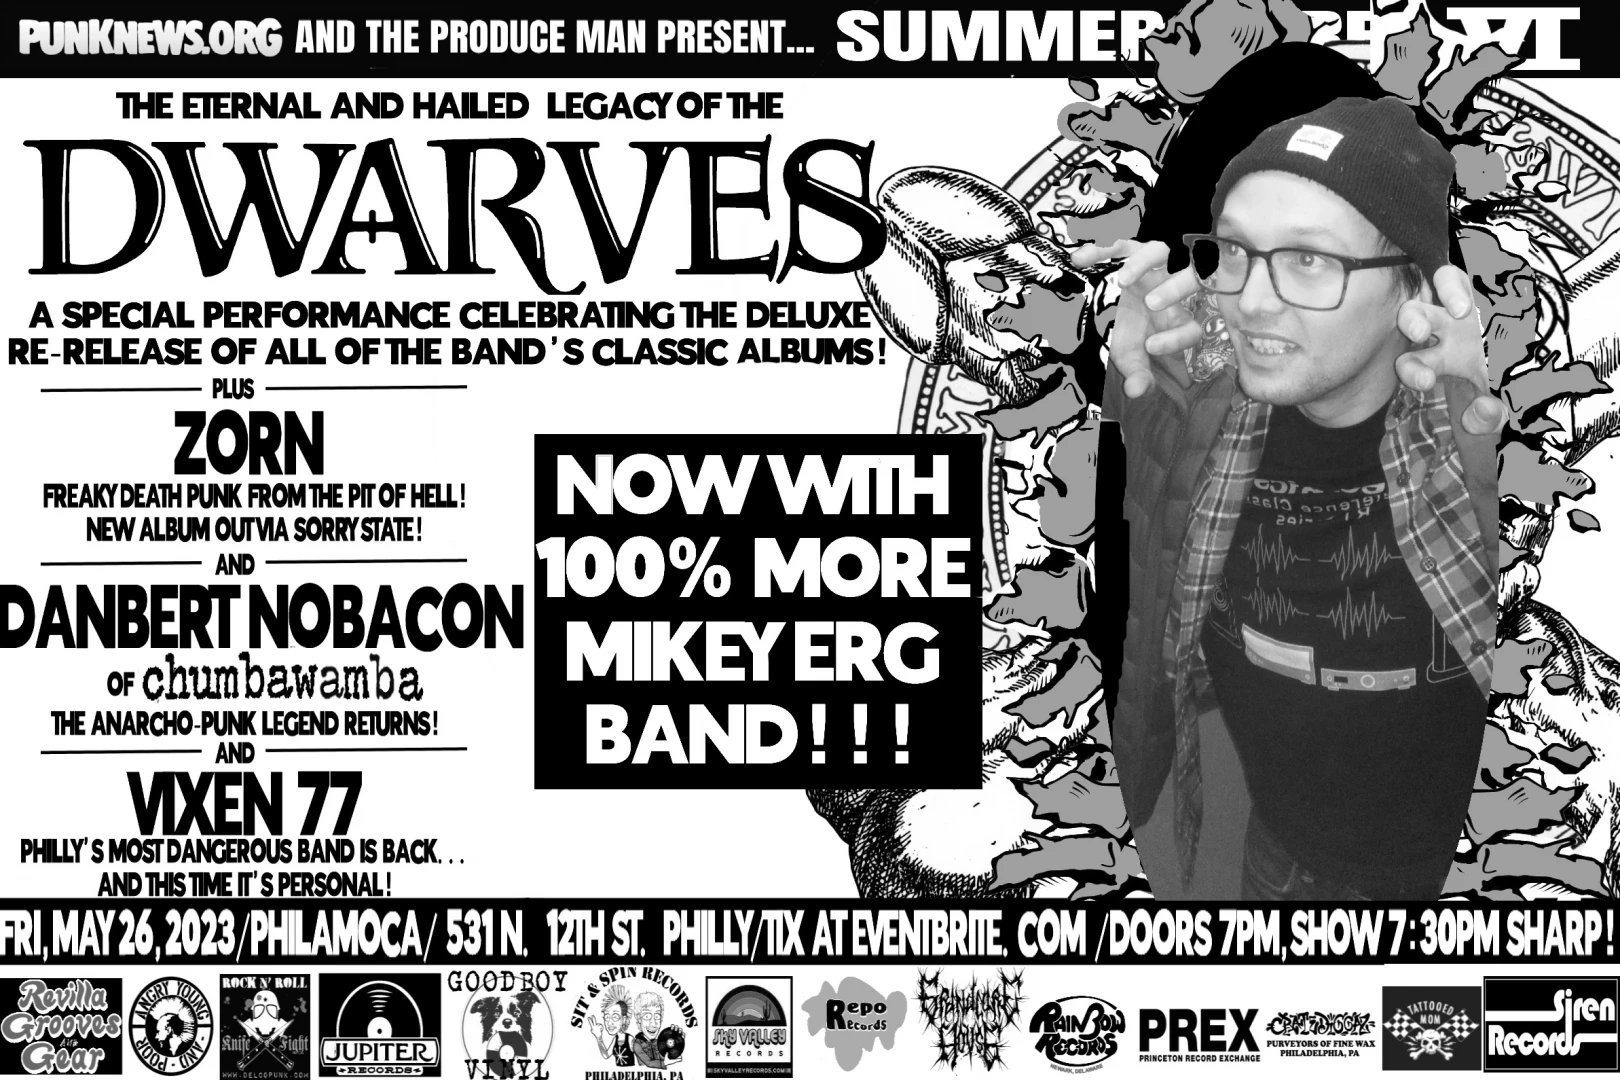 Surprise!!! The Mikey Erg Band is playing Summer Soiree 6 with the ...